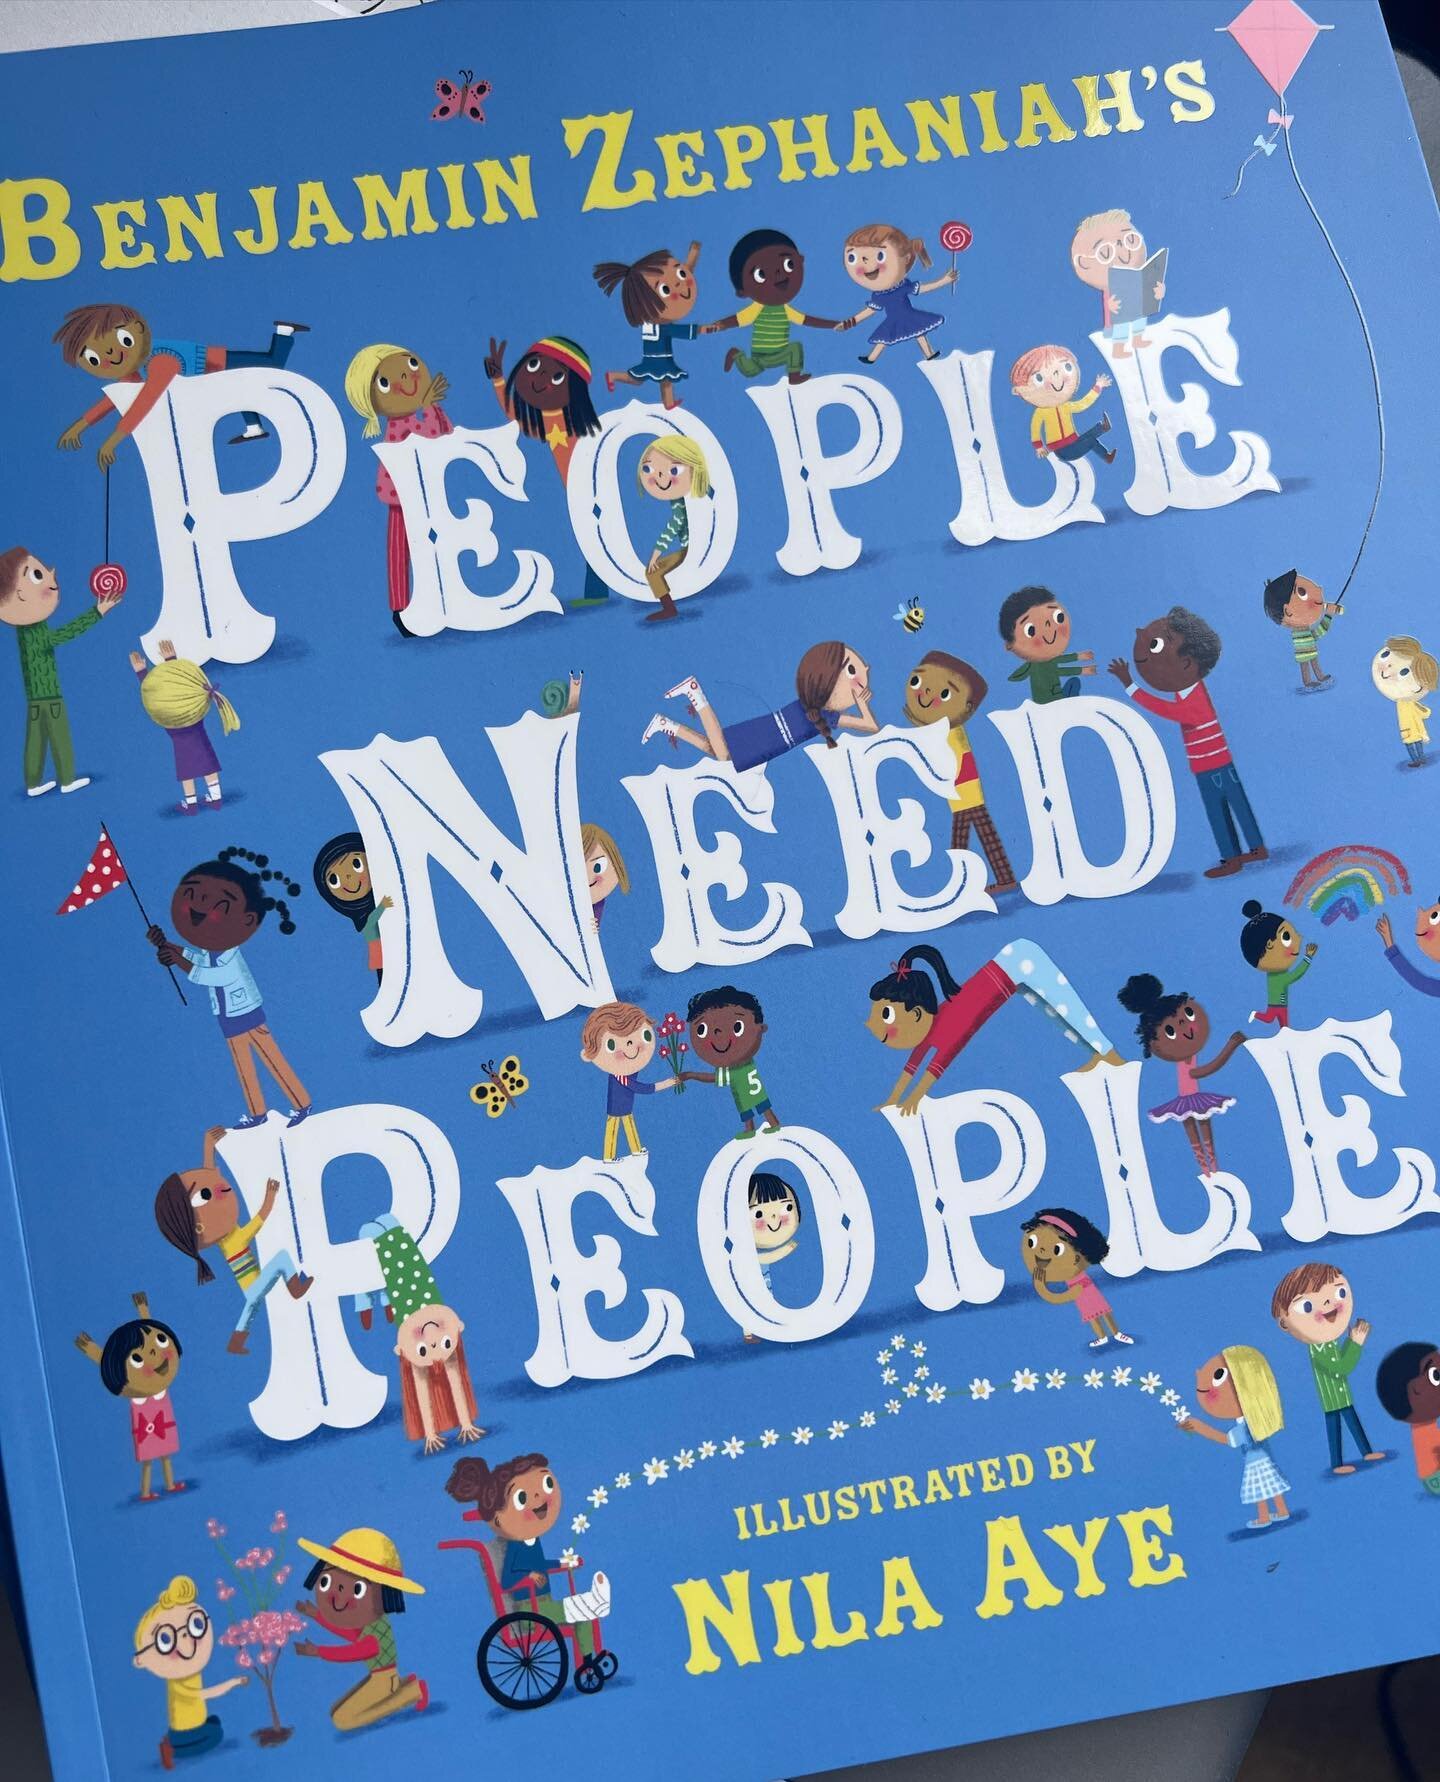 We as people need to unite and work together. My second book with the amazing @officialbenjaminzephaniah is out now in paperback! Whoopity whoop whoop 🙌🏼 

@hachettechildrens 
@kidscornerillustration_ 
@katiemakesbooks 

#childrensbooks #pictureboo